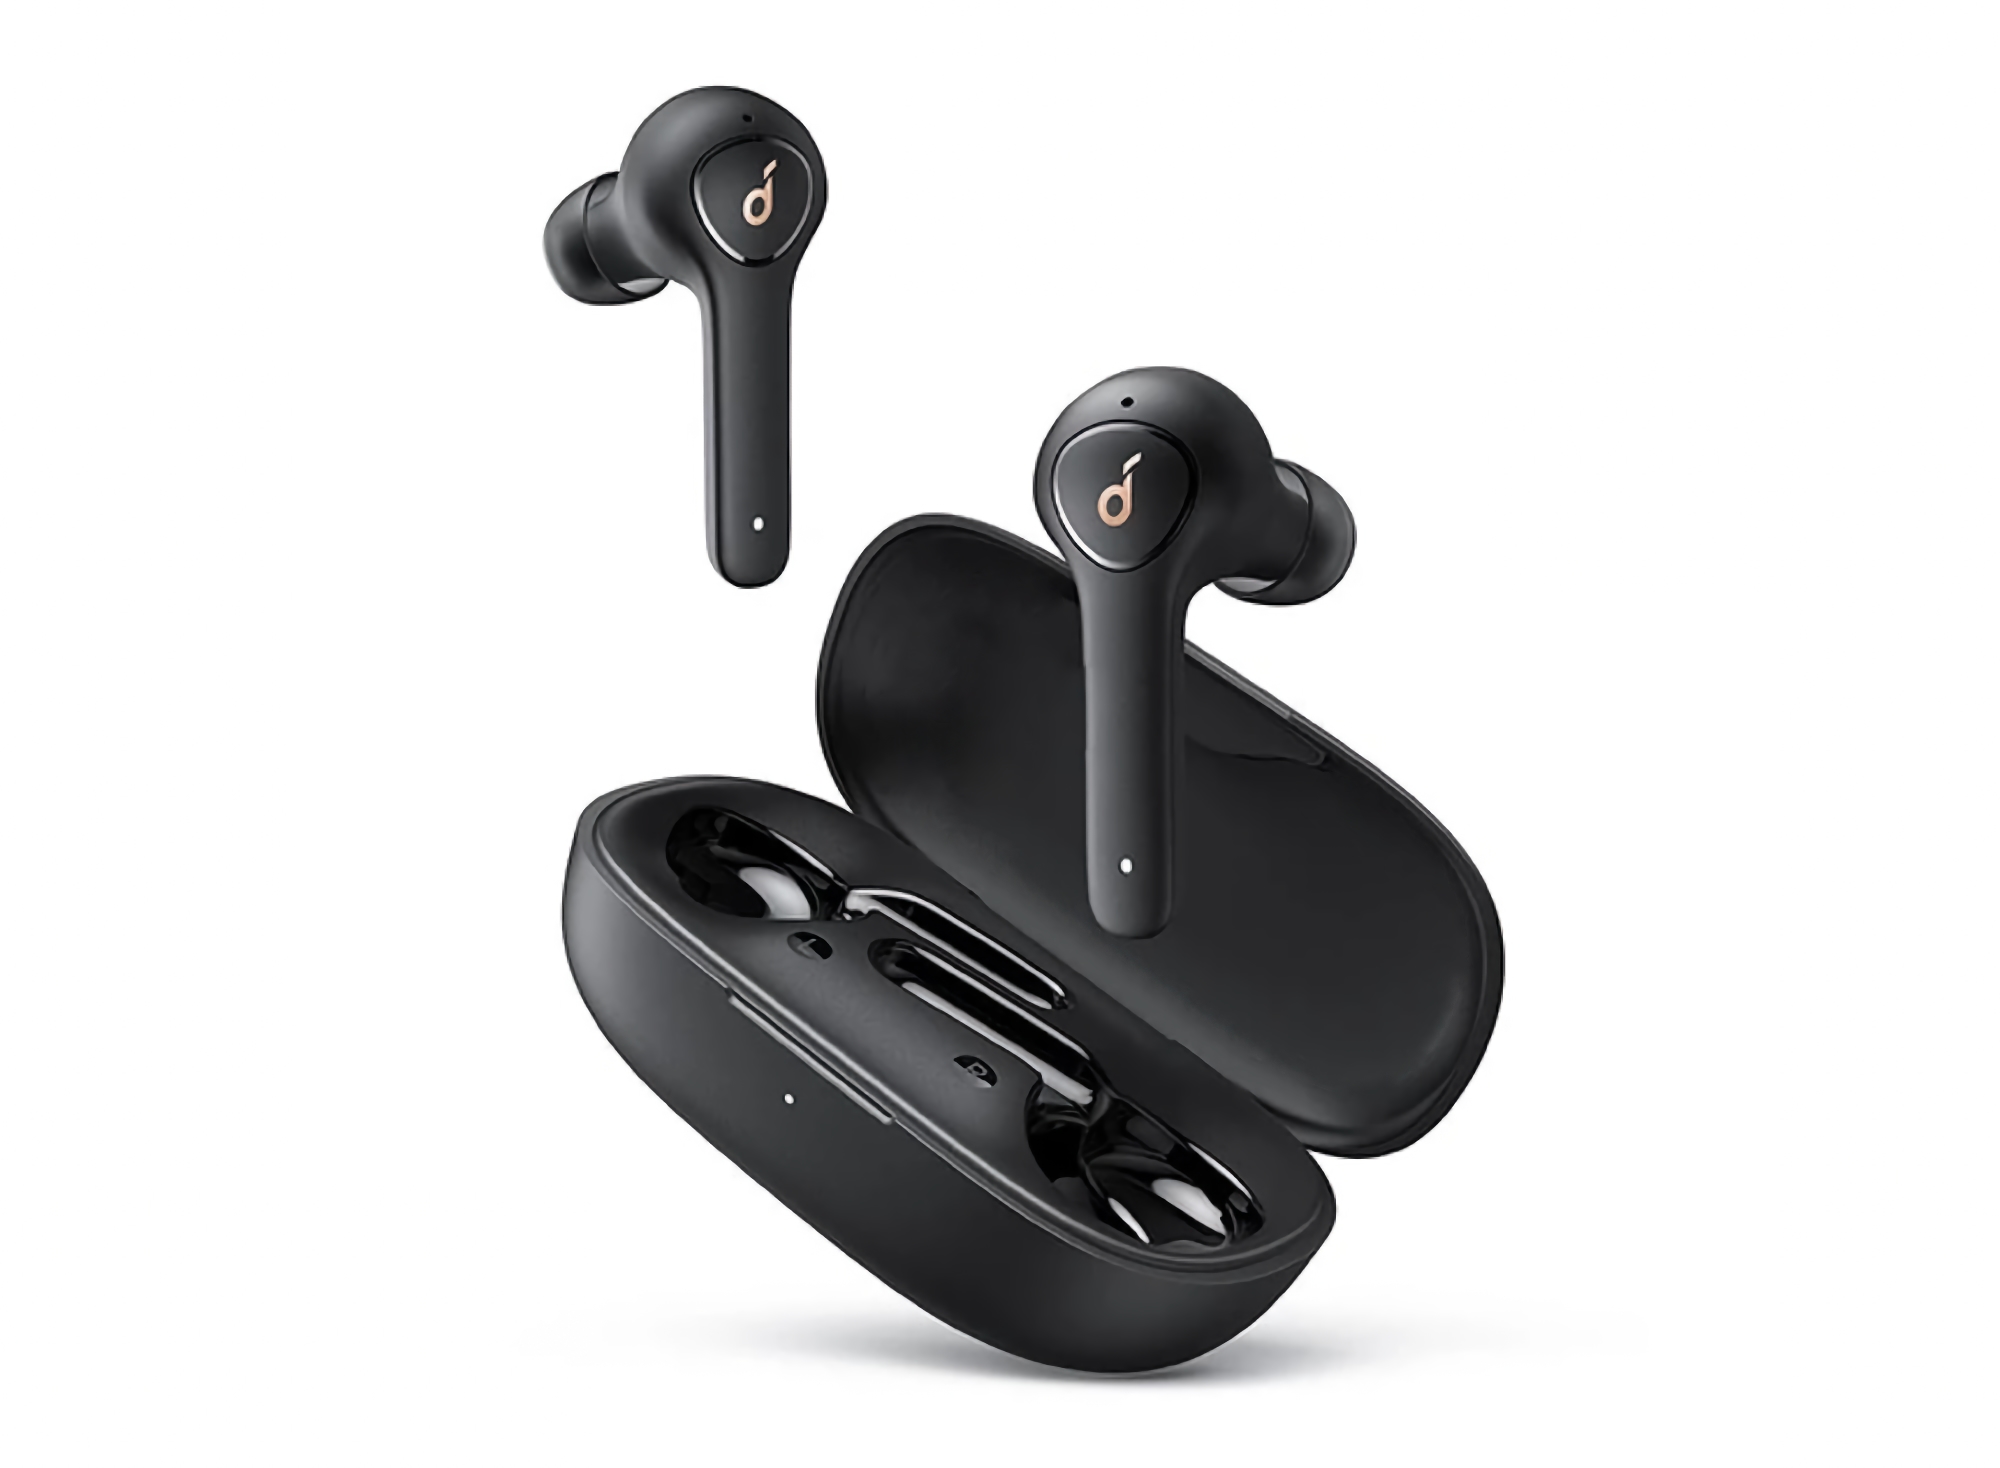 Anker Soundcore Life P2: TWS headphones with up to 40 hours of battery life, IPX7 protection and Qualcomm cVc 8.0 technology for $45